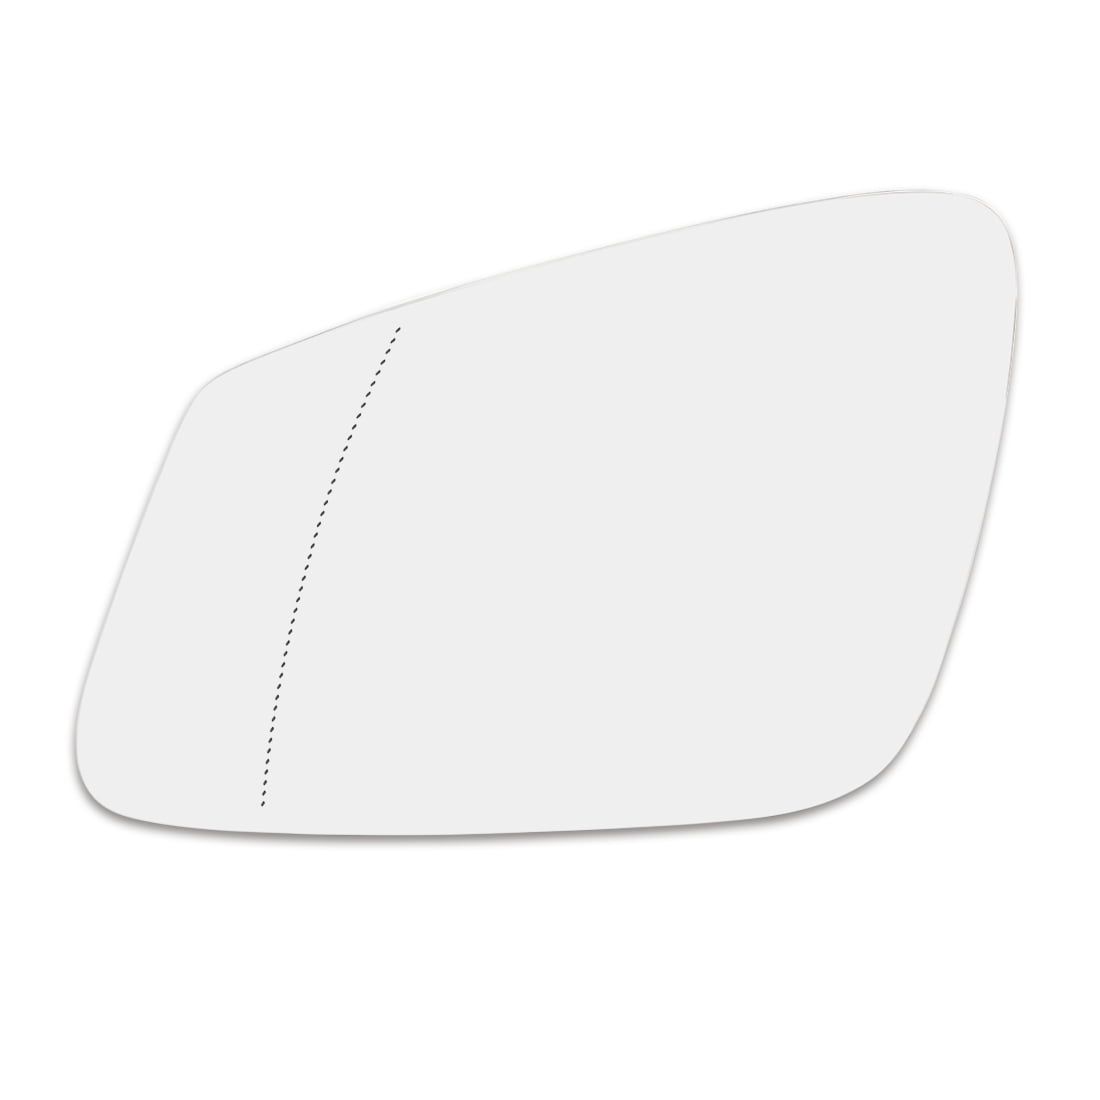 X AUTOHAUX Mirror Glass Heated with Backing Plate Passenger Side Right Side Rear View Mirror Glass for BMW X1 320i 340i 